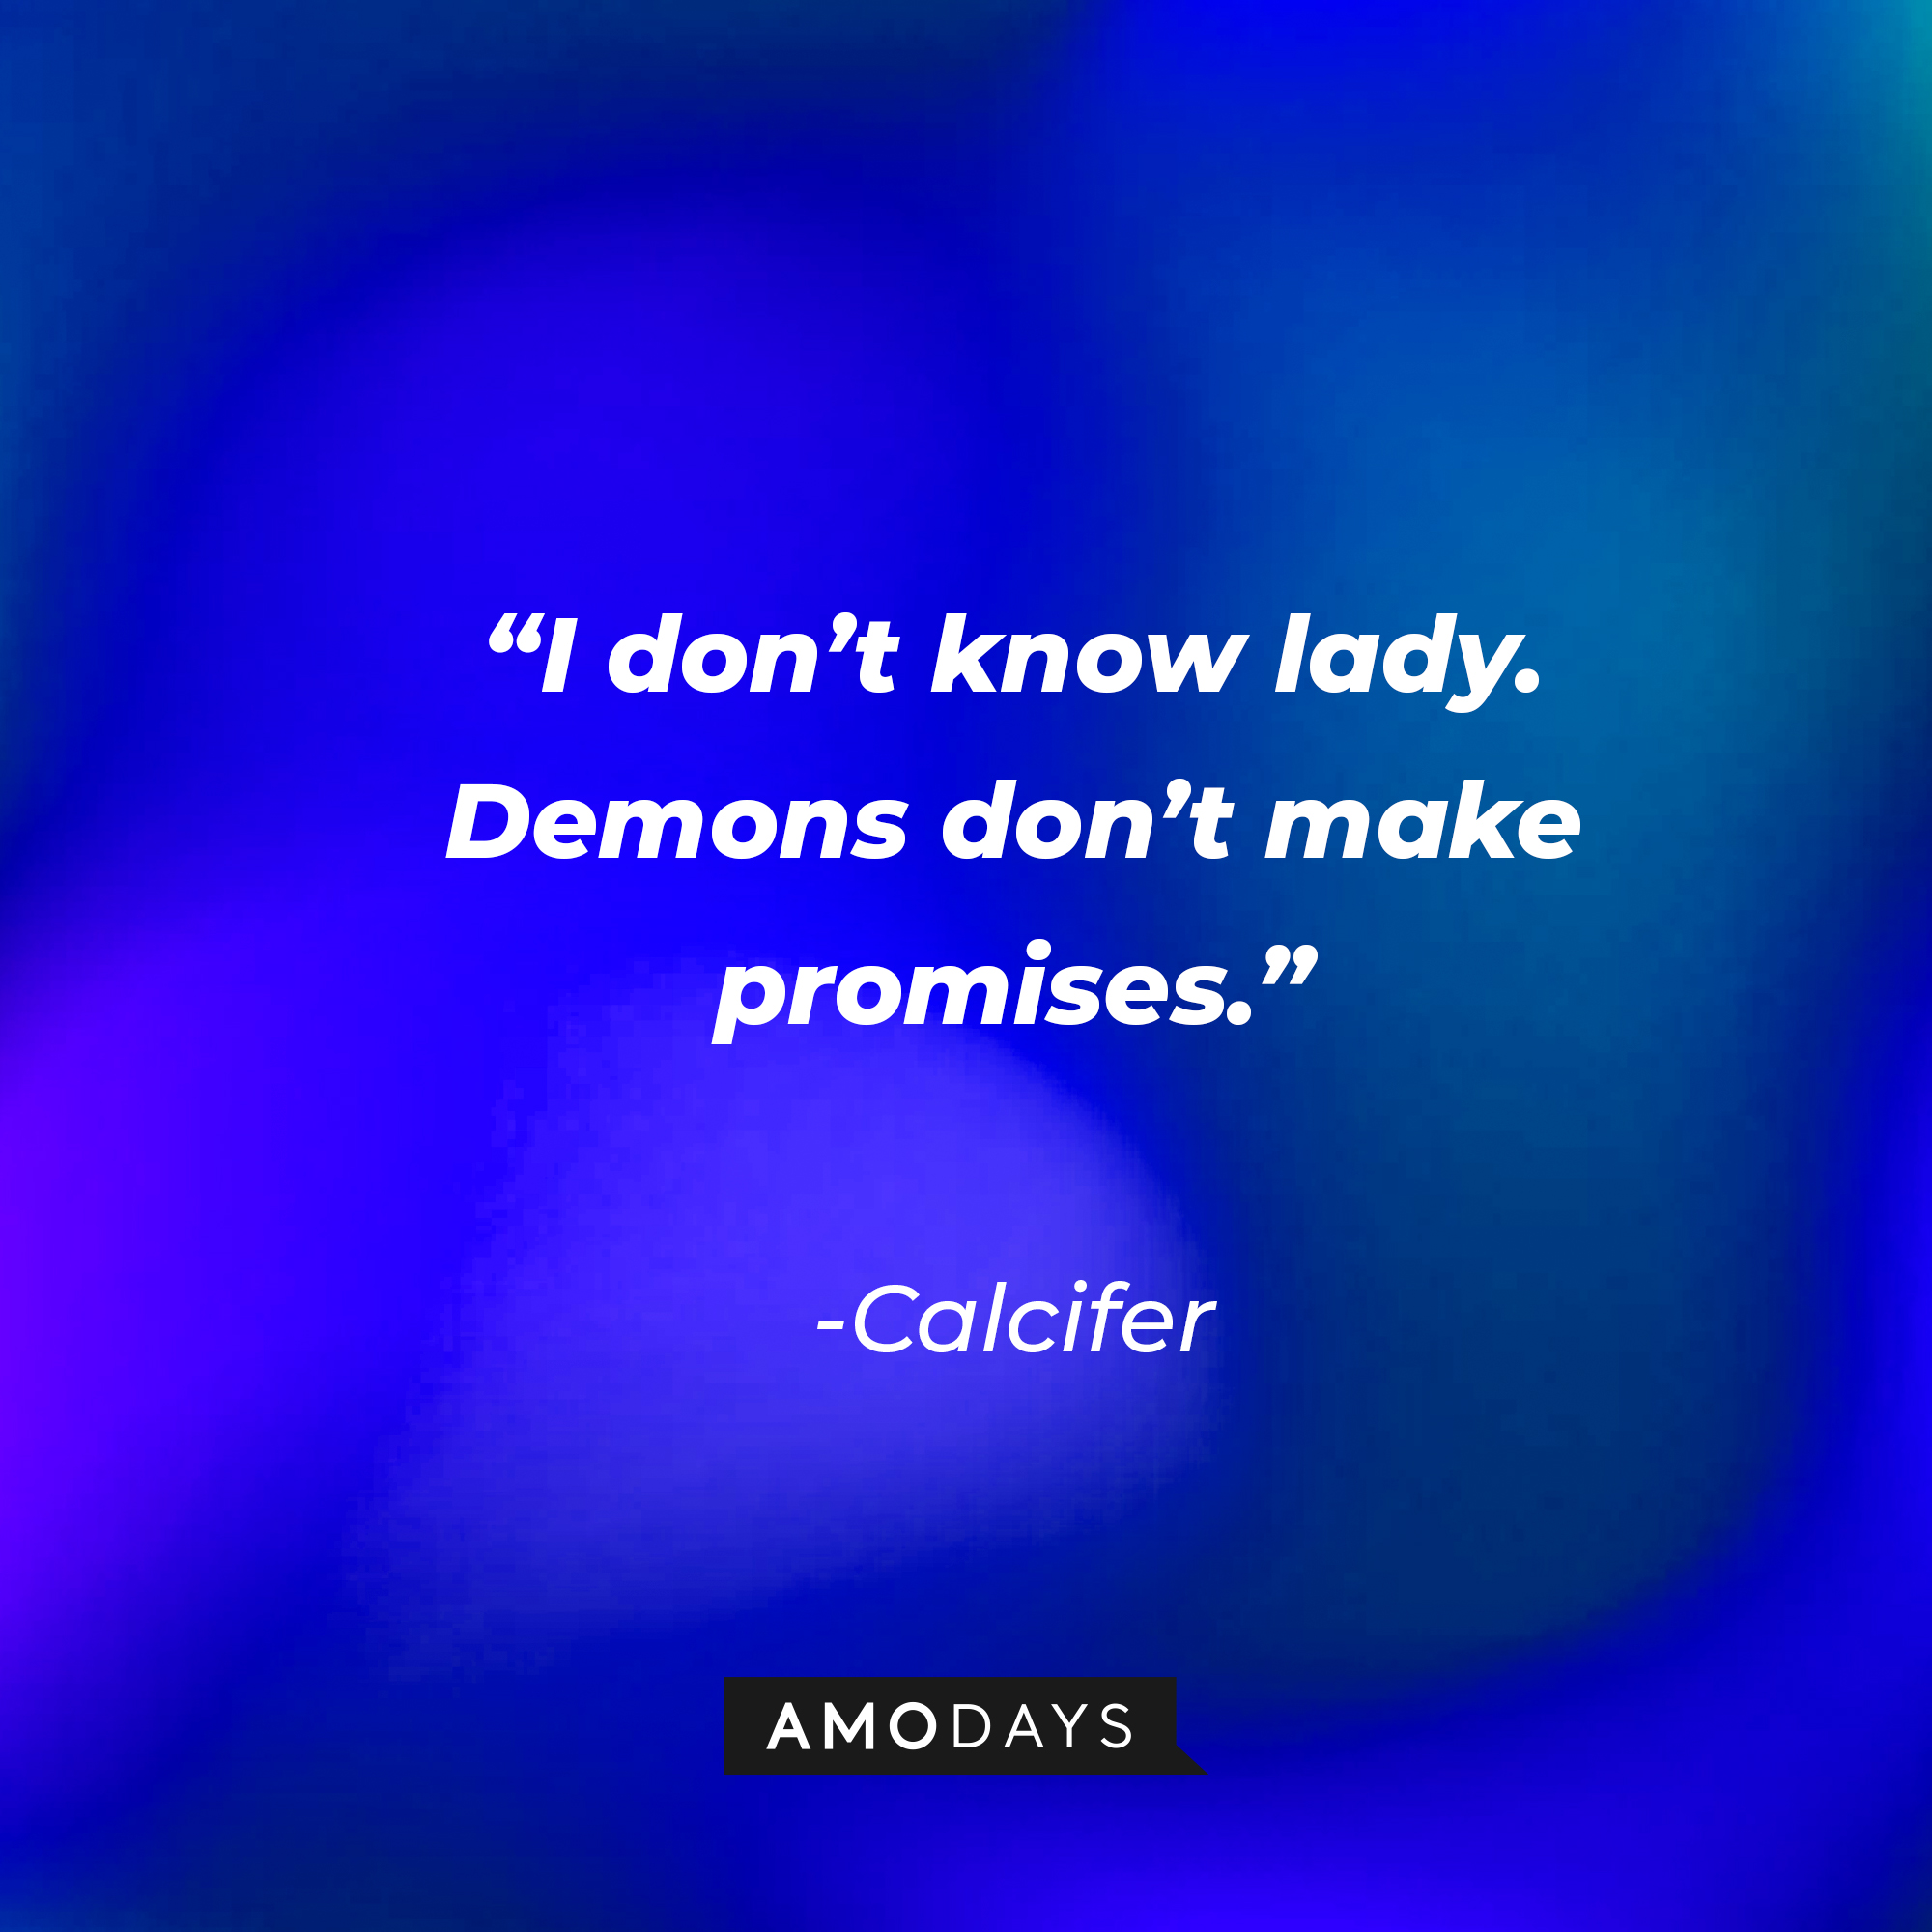 Calcifer’s quote: “I don’t know lady. Demons don’t make promises.” | Source: AmoDays